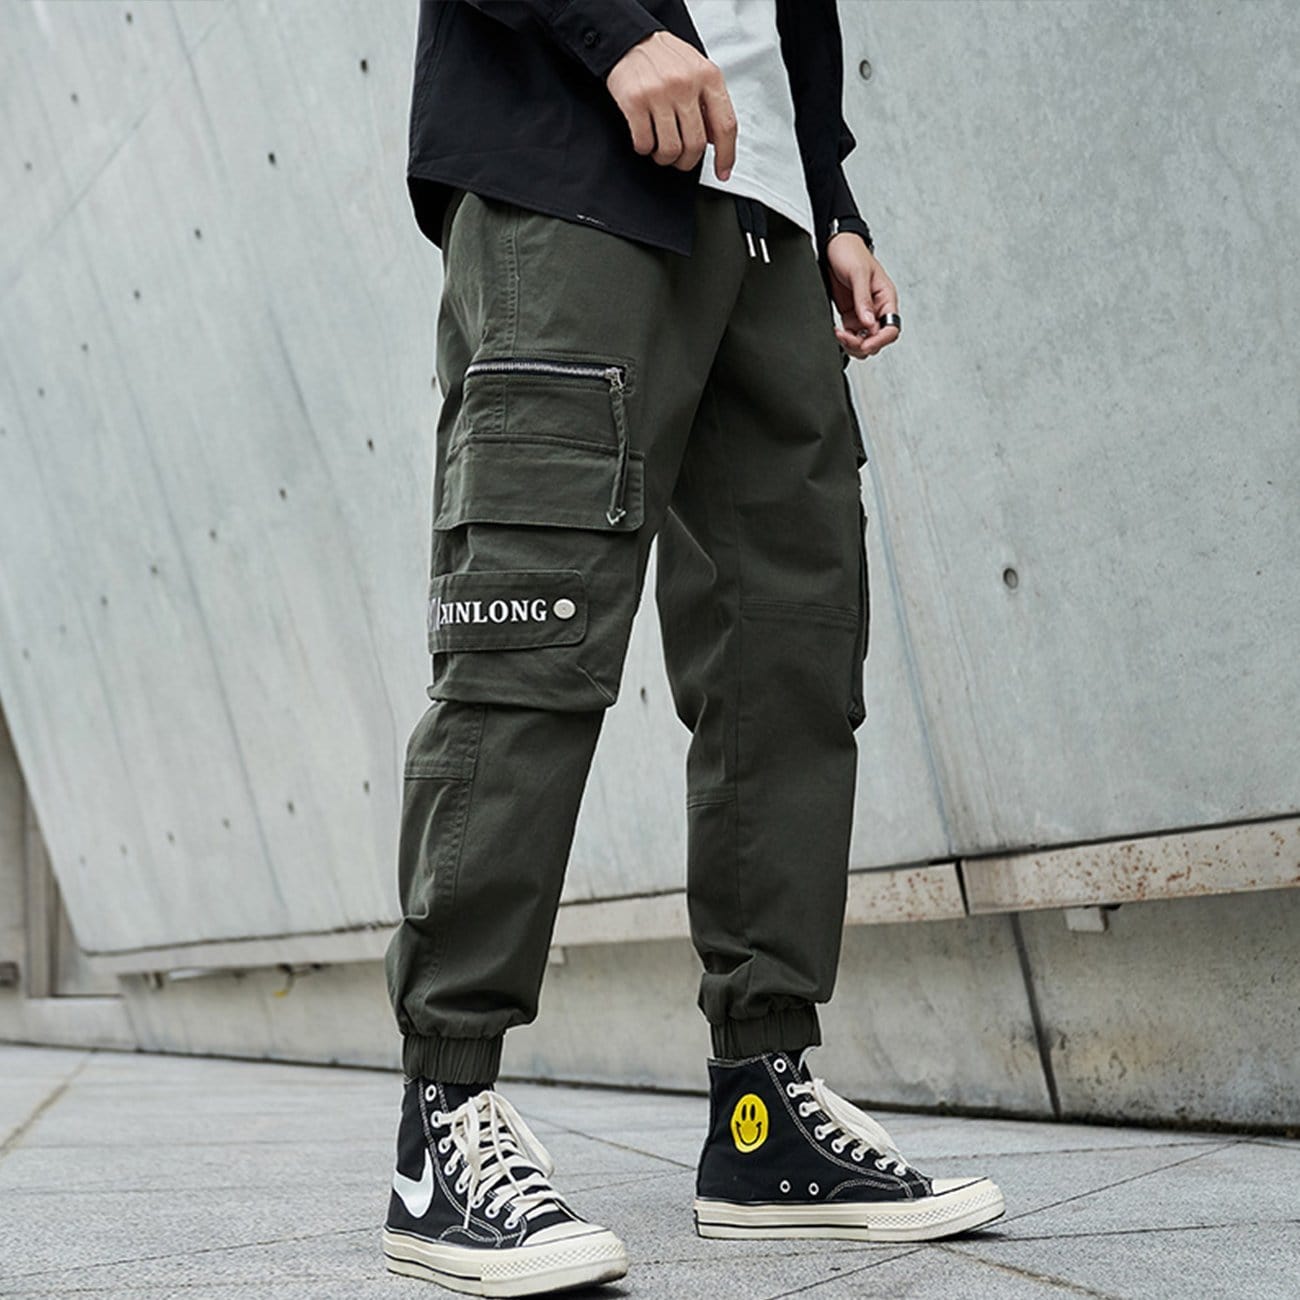 TO Patchwork Pockets Cargo Pants